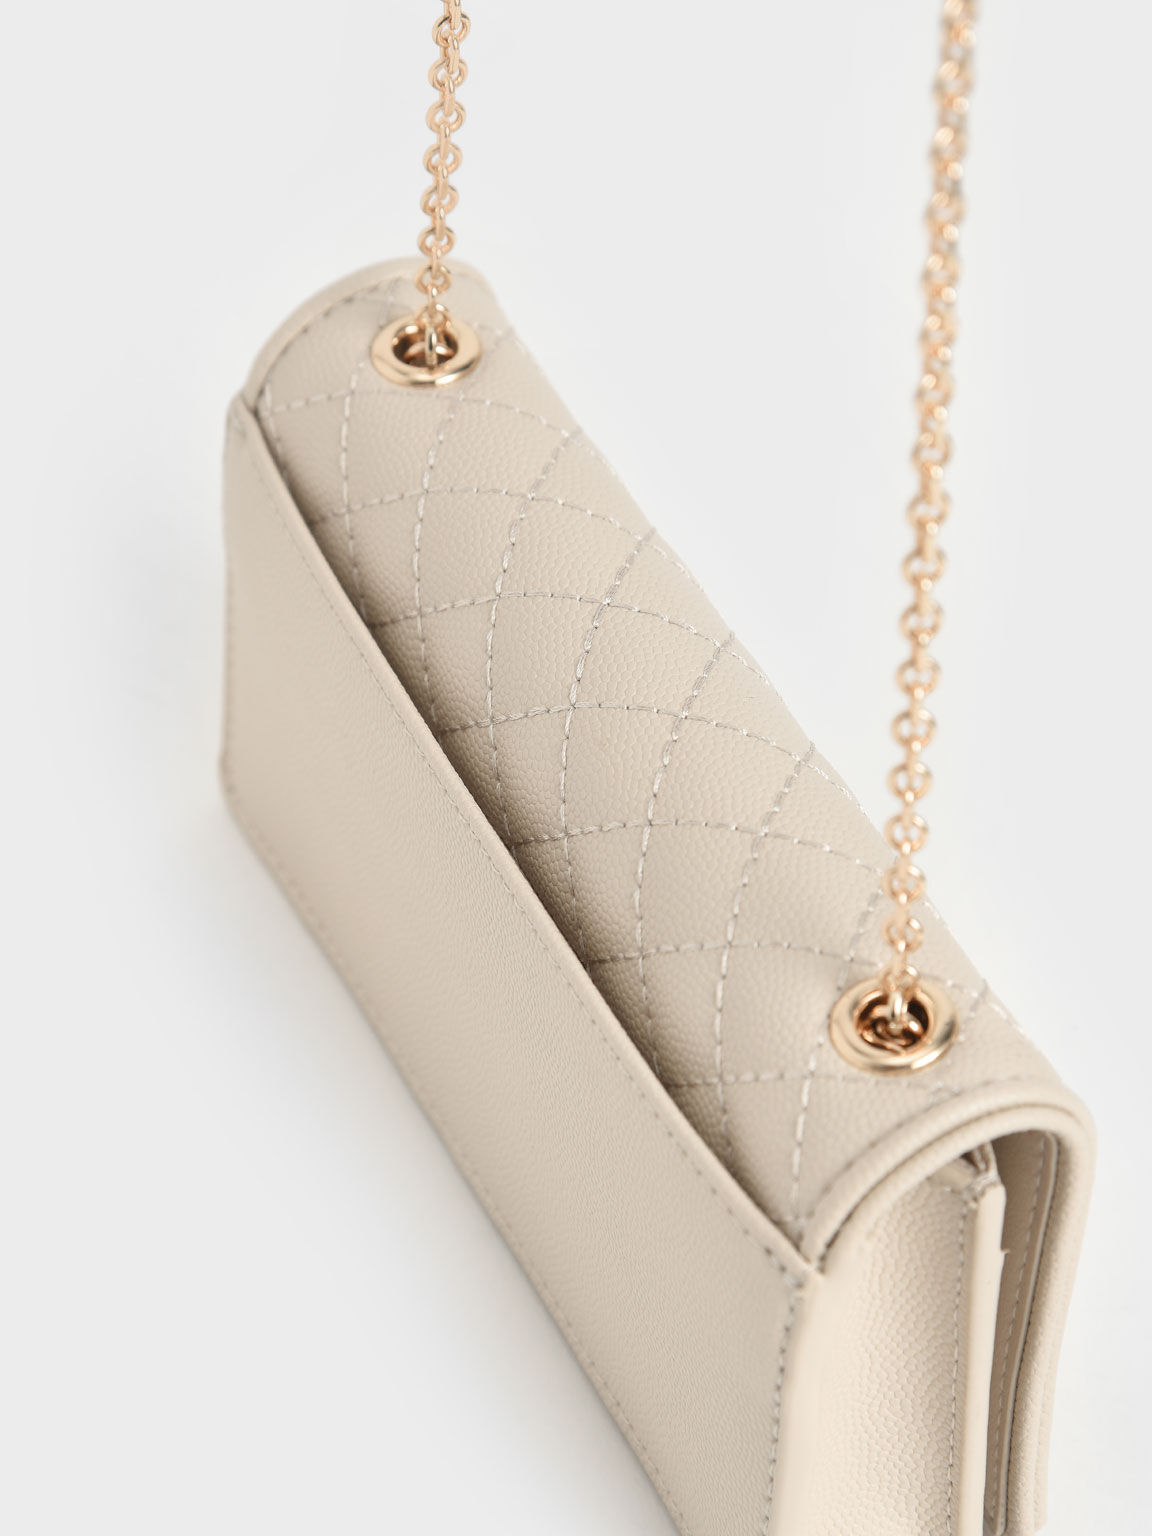 charles and keith wallet on chain｜TikTok Search